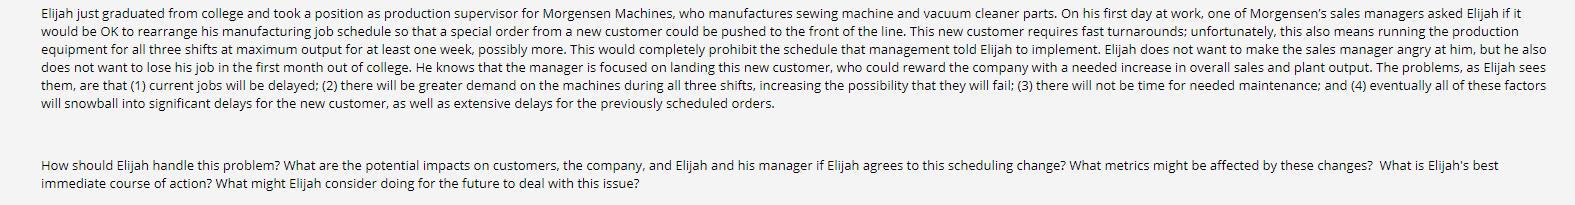 Elijah just graduated from college and took a position as production supervisor for Morgensen Machines, who manufactures sewi